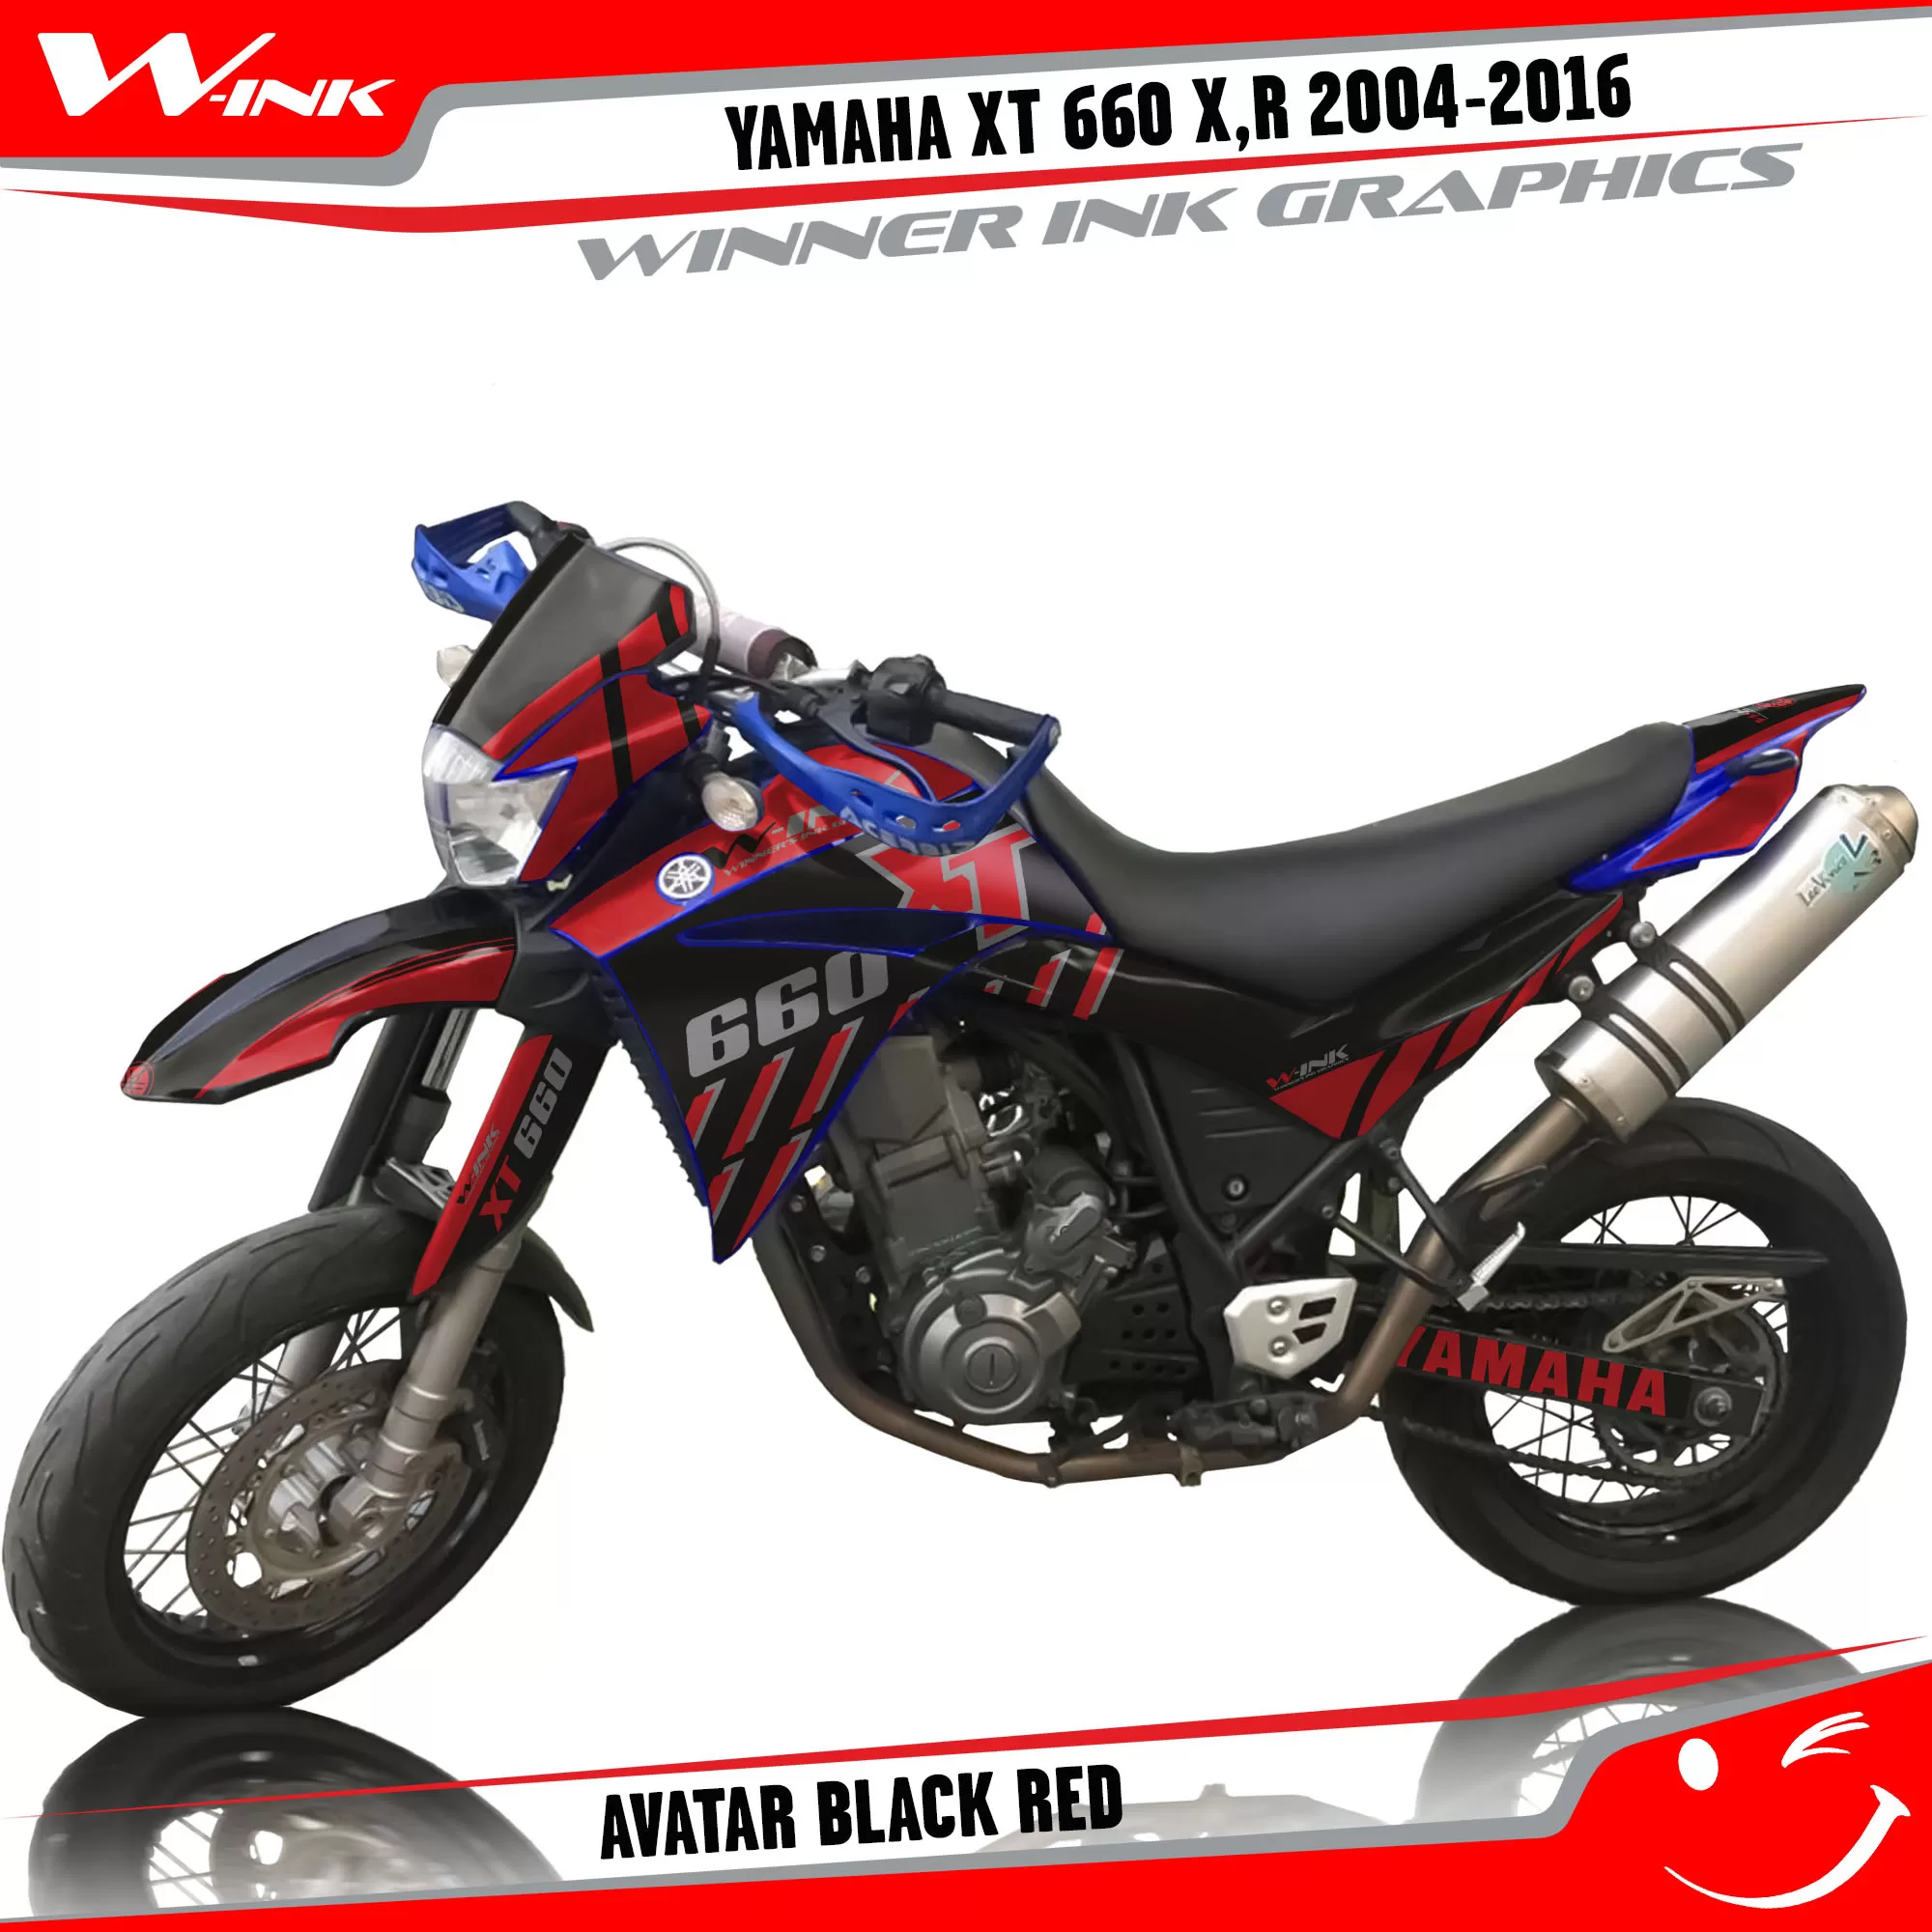 Yamaha-XT660X-2004-2005-2006-2007-2013 2014 2015 2016-graphics-kit-and-decals-Avatar-Black-Red